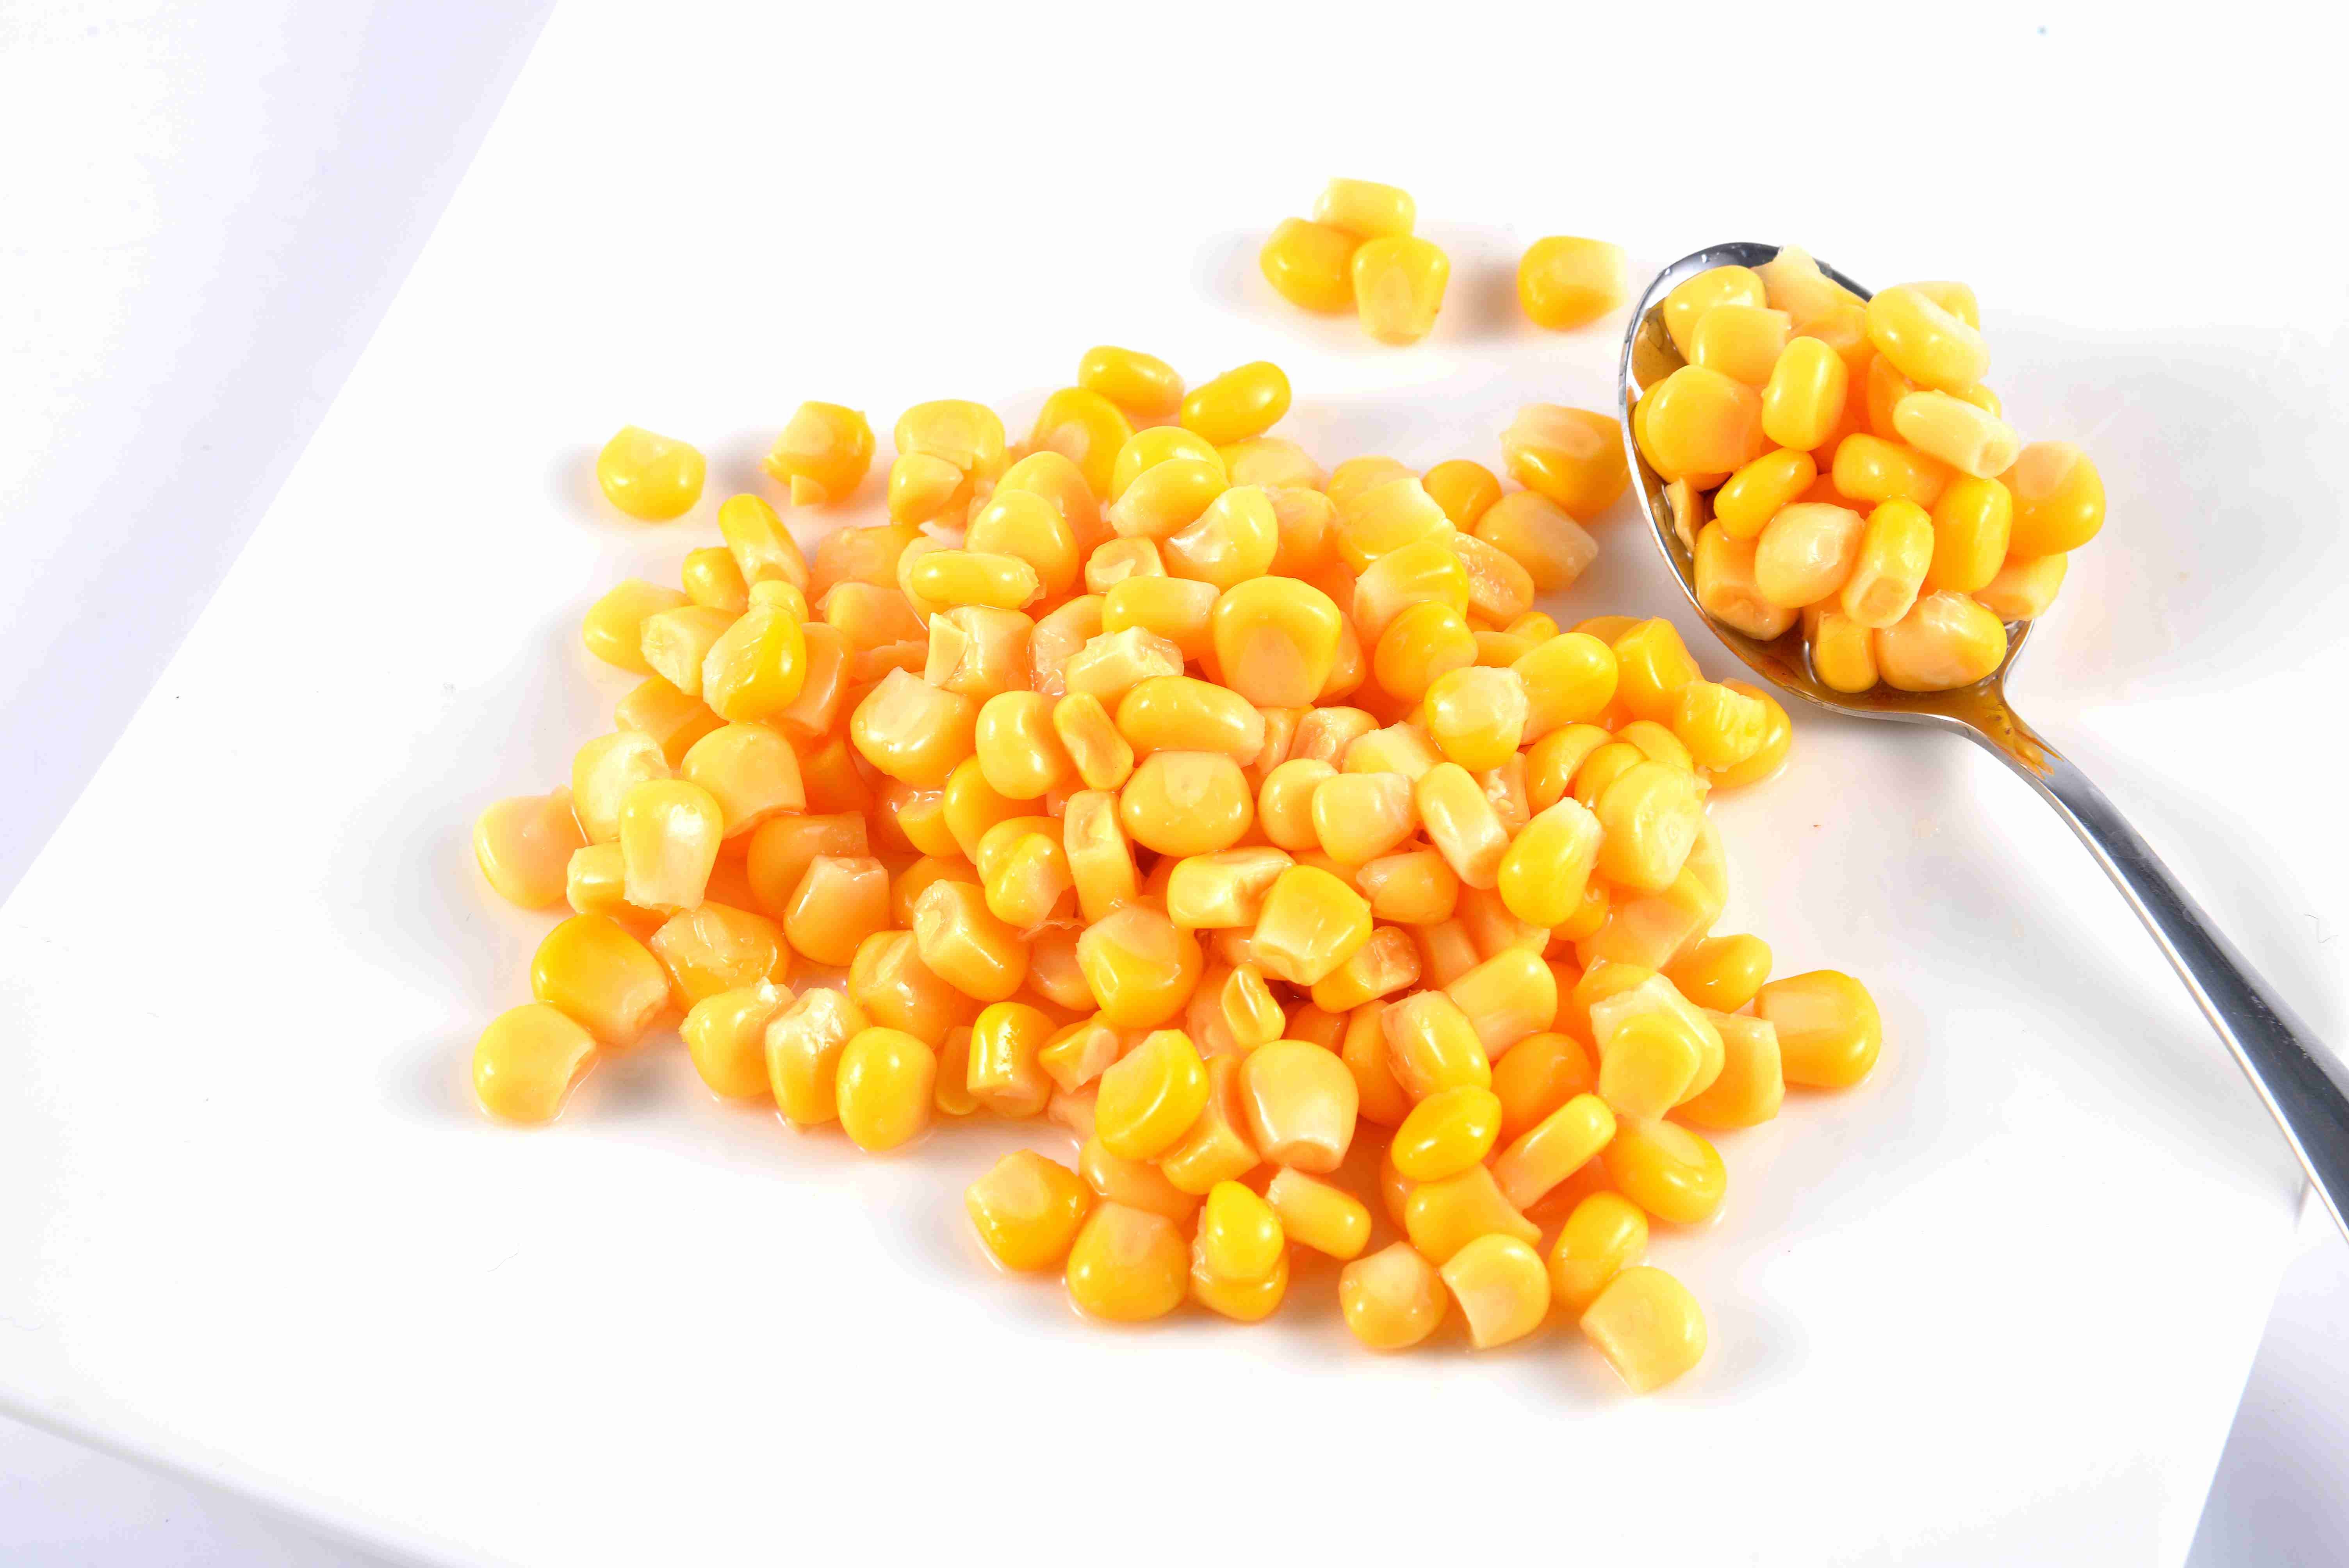 Steamed Type Corn Whole Kernel / Canned Sweet Kernel Corn No Artificial Colors